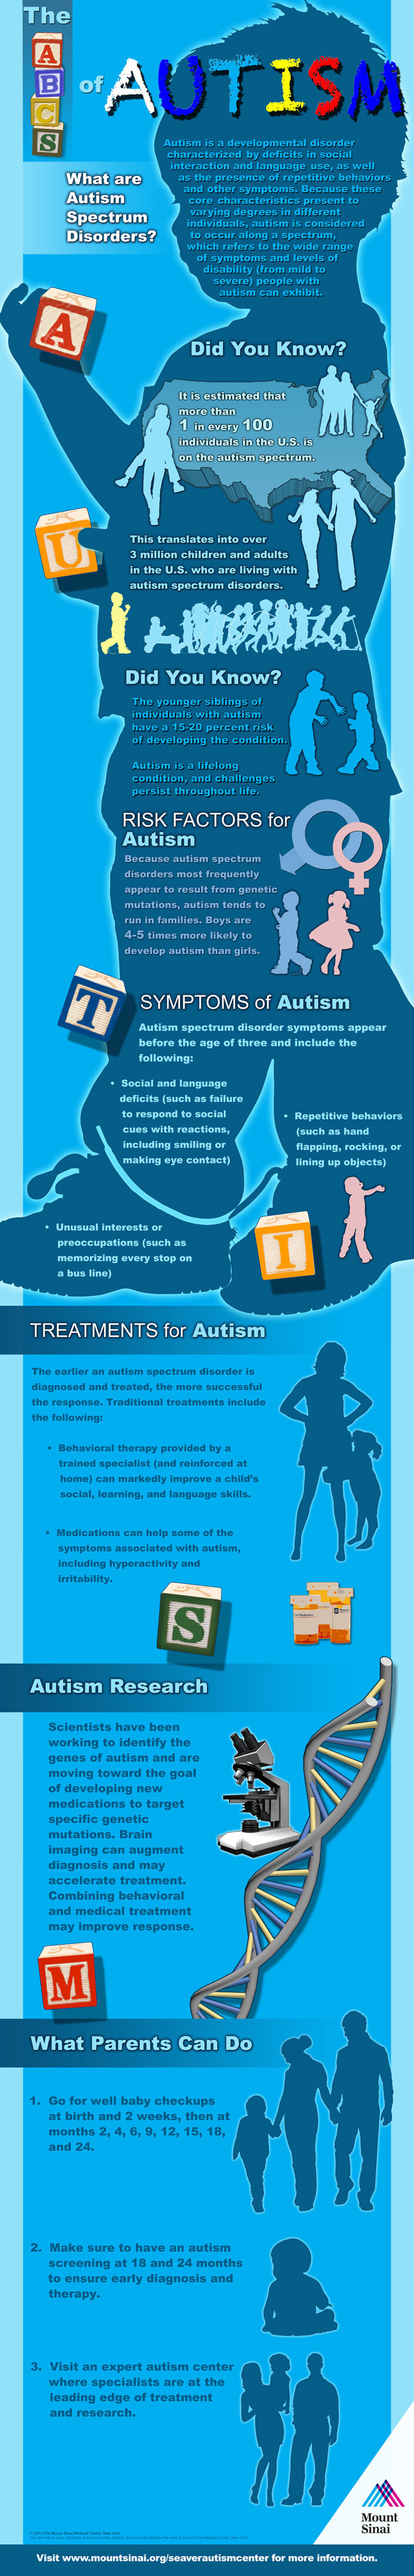 The ABCs of Autism Infographic